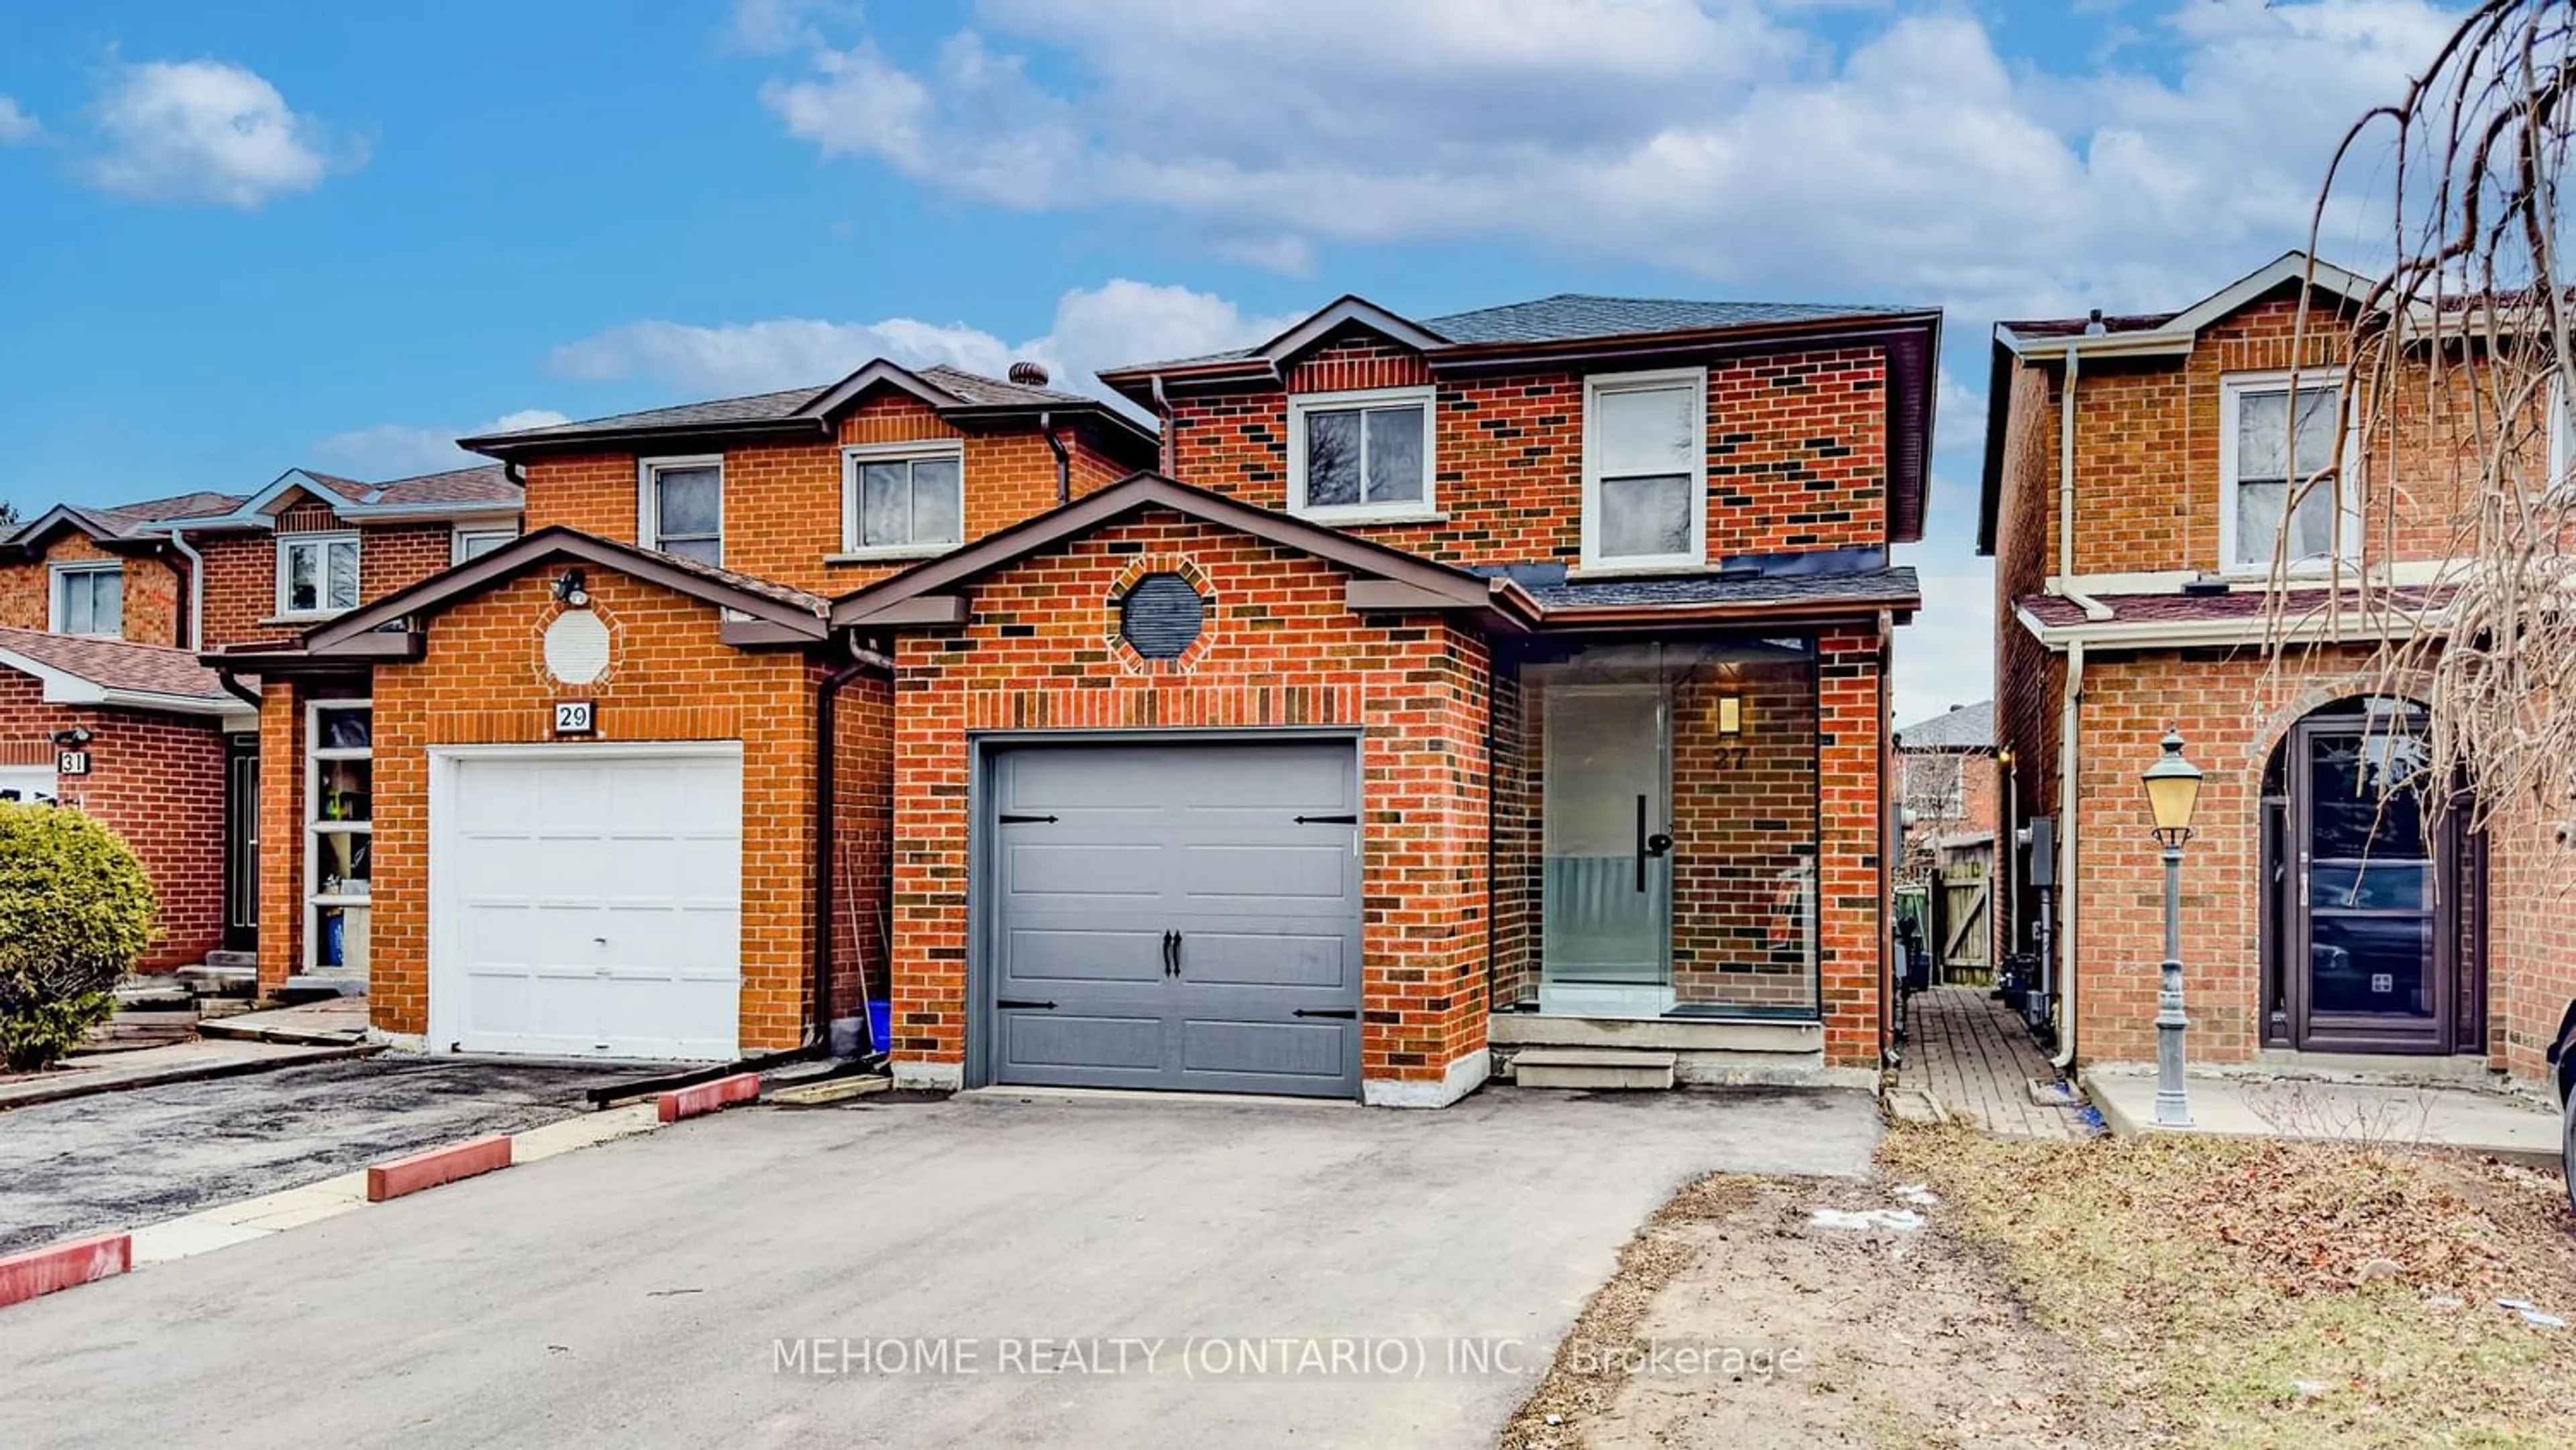 Home with brick exterior material for 27 Debden Rd, Markham Ontario L3R 6V7